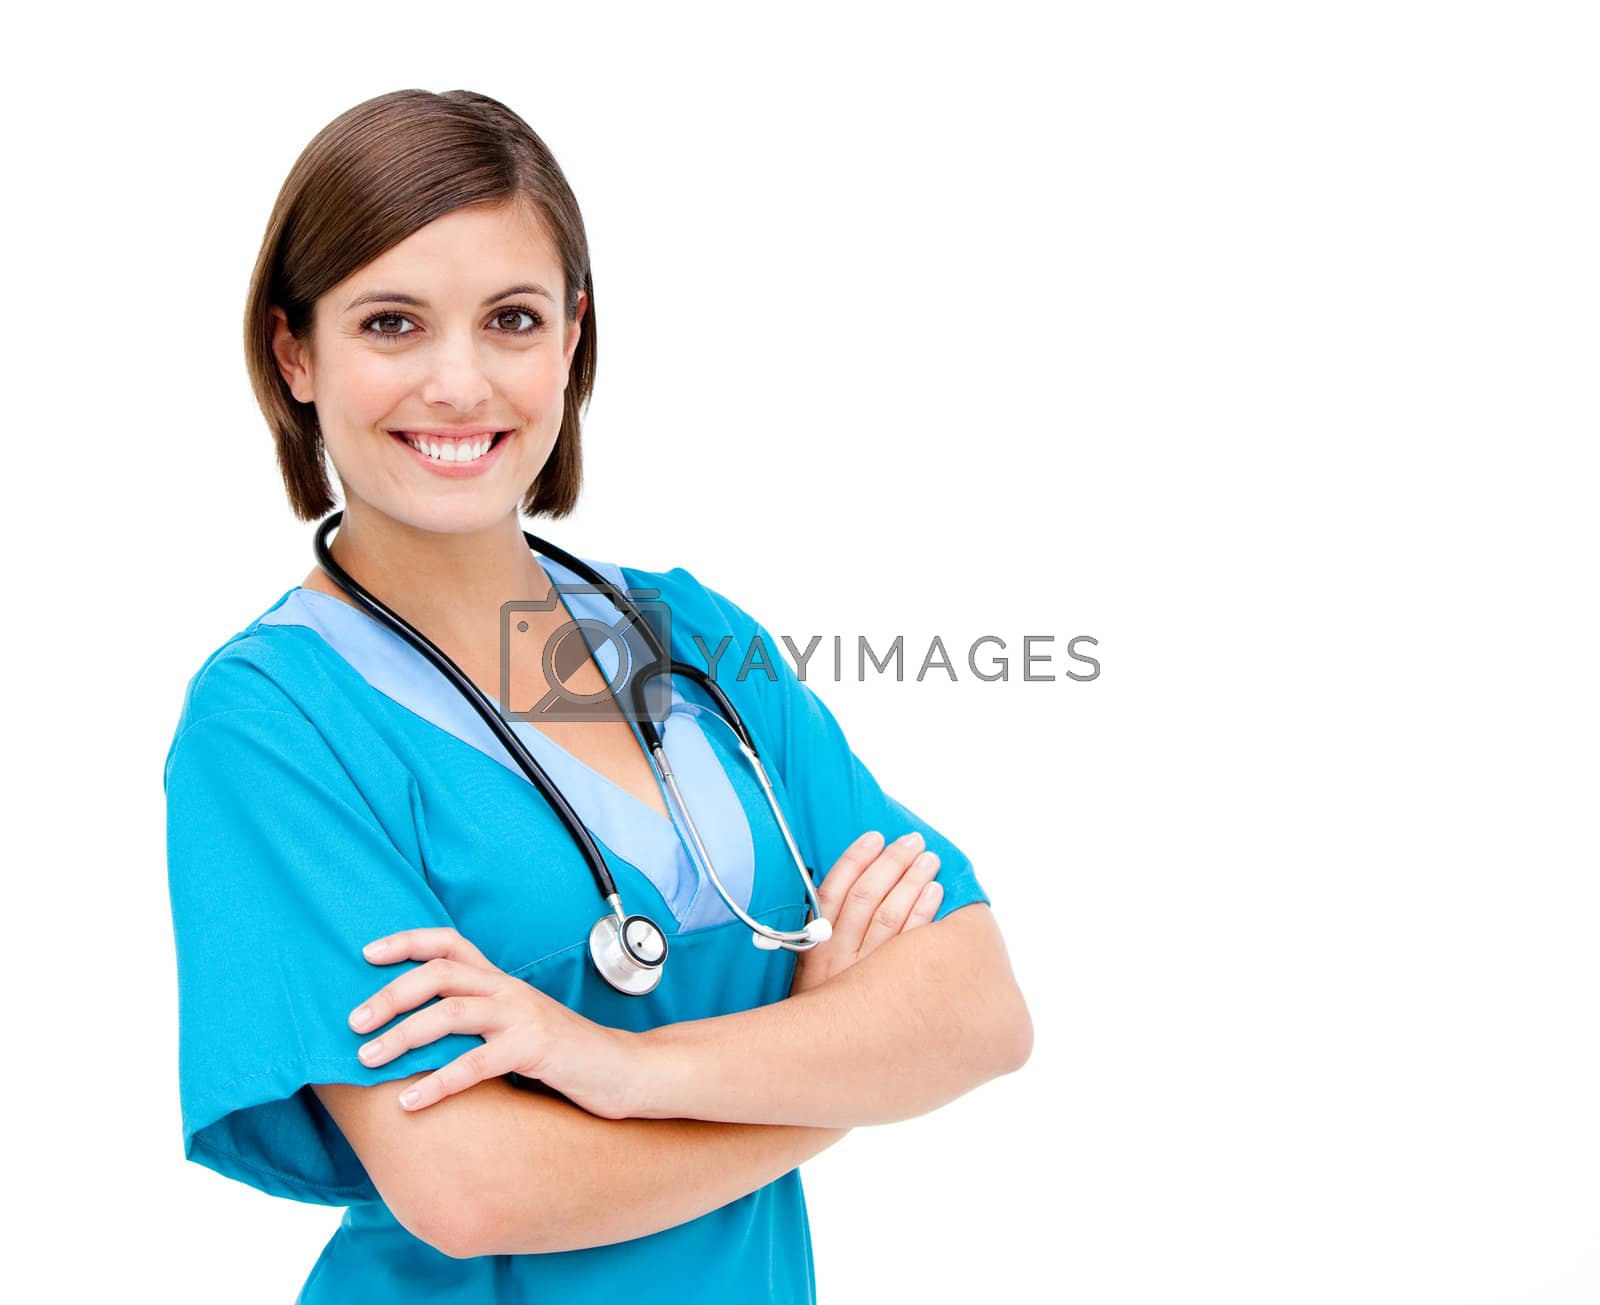 Royalty free image of Confident female doctor folding arms  by Wavebreakmedia